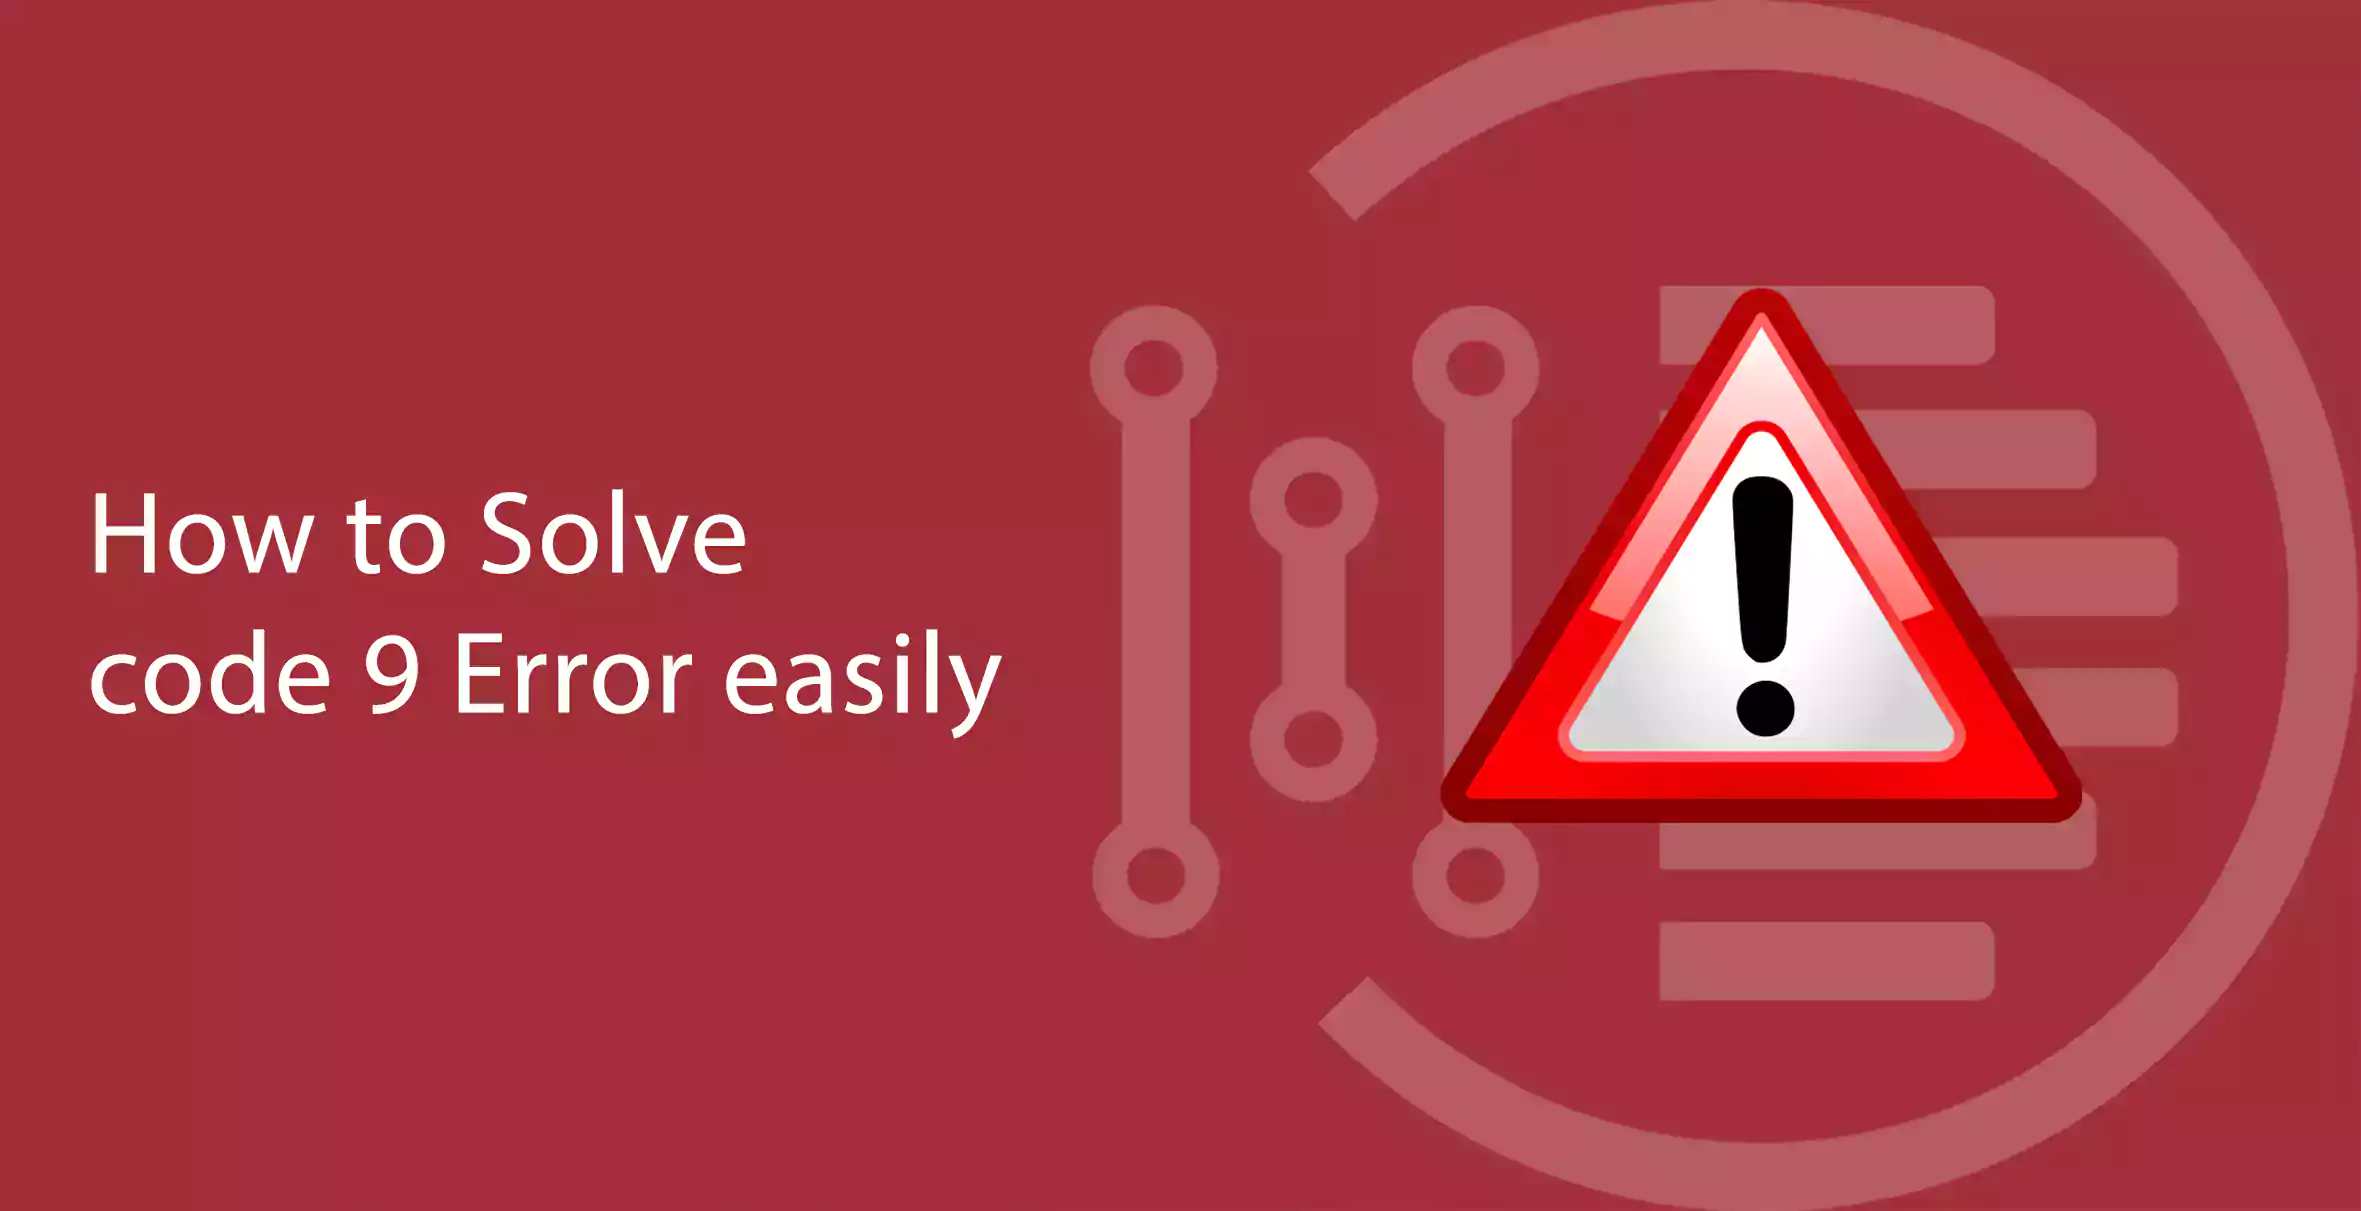 How to Solve code 9 Error easily